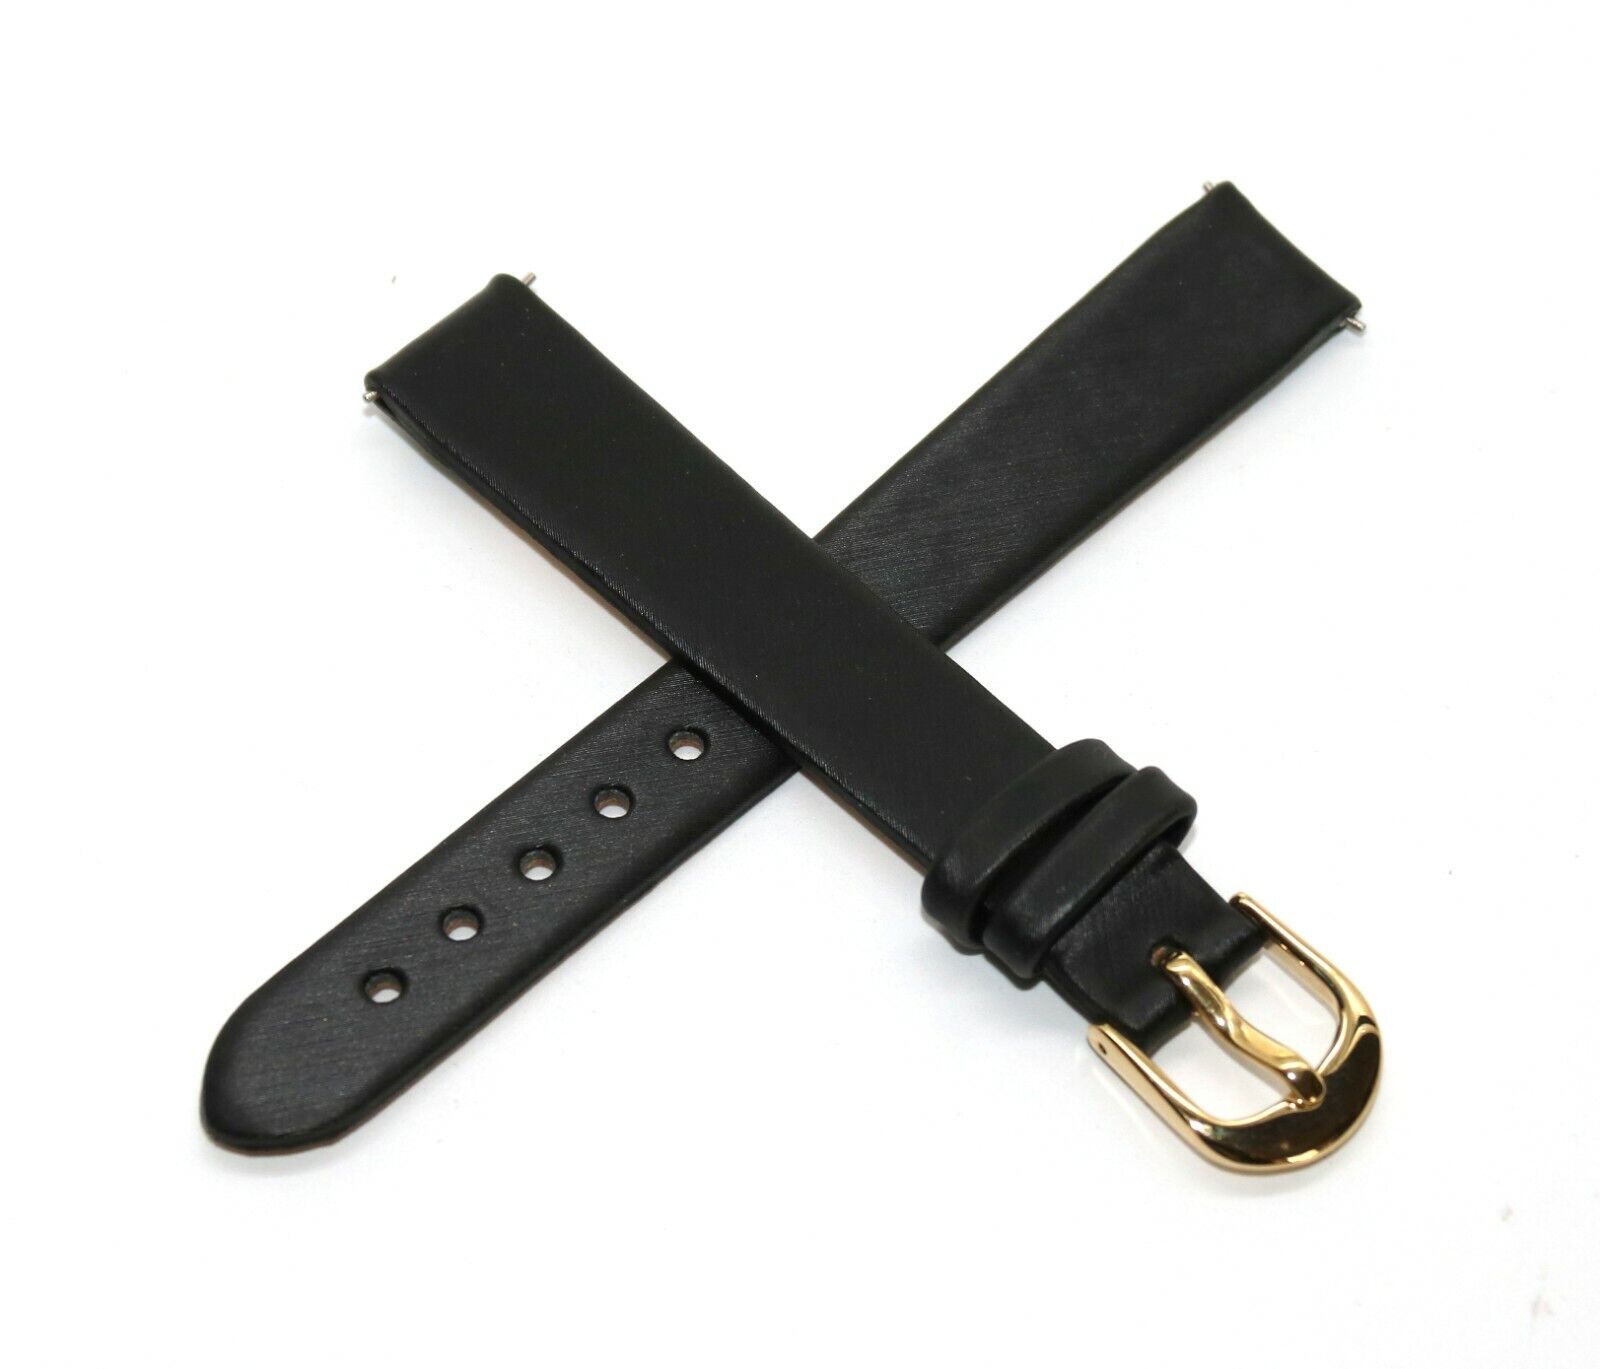 Kenneth Jay Lane 14MM Genuine Leather Watch Strap 6.75" BLACK with Gold Buckle